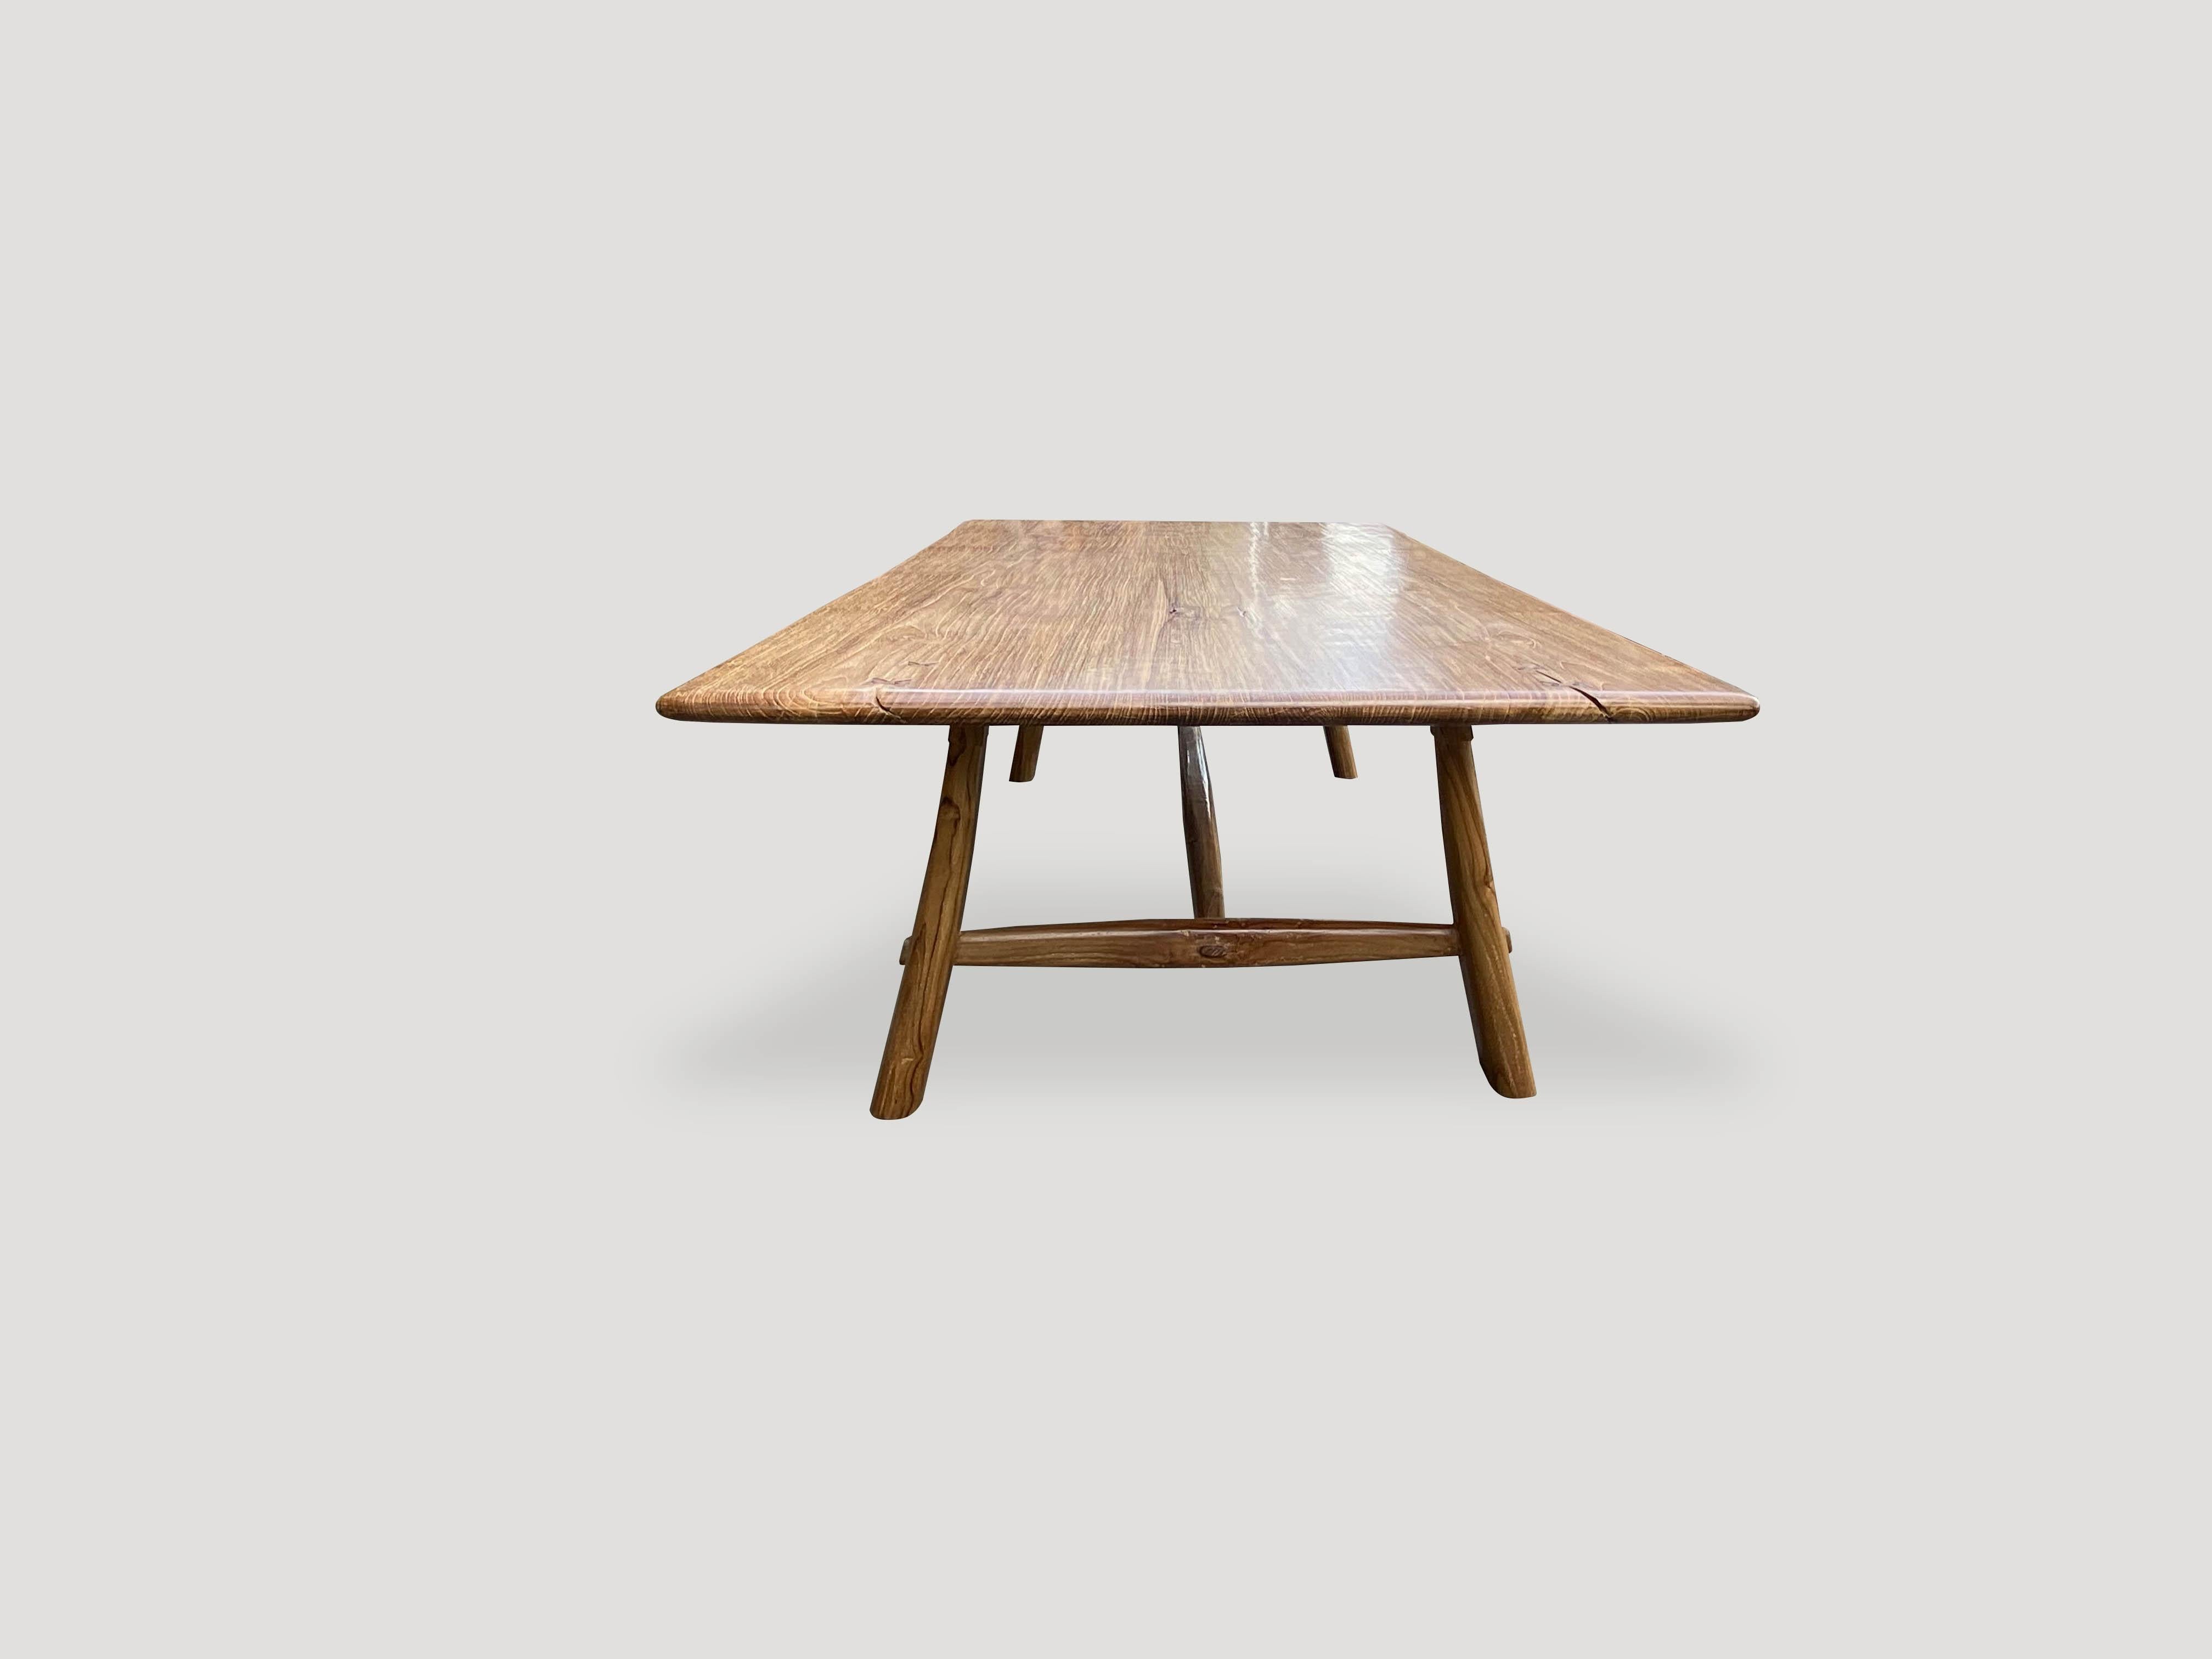 Andrianna Shamaris Midcentury Couture Teak Wood Dining Table For Sale 4